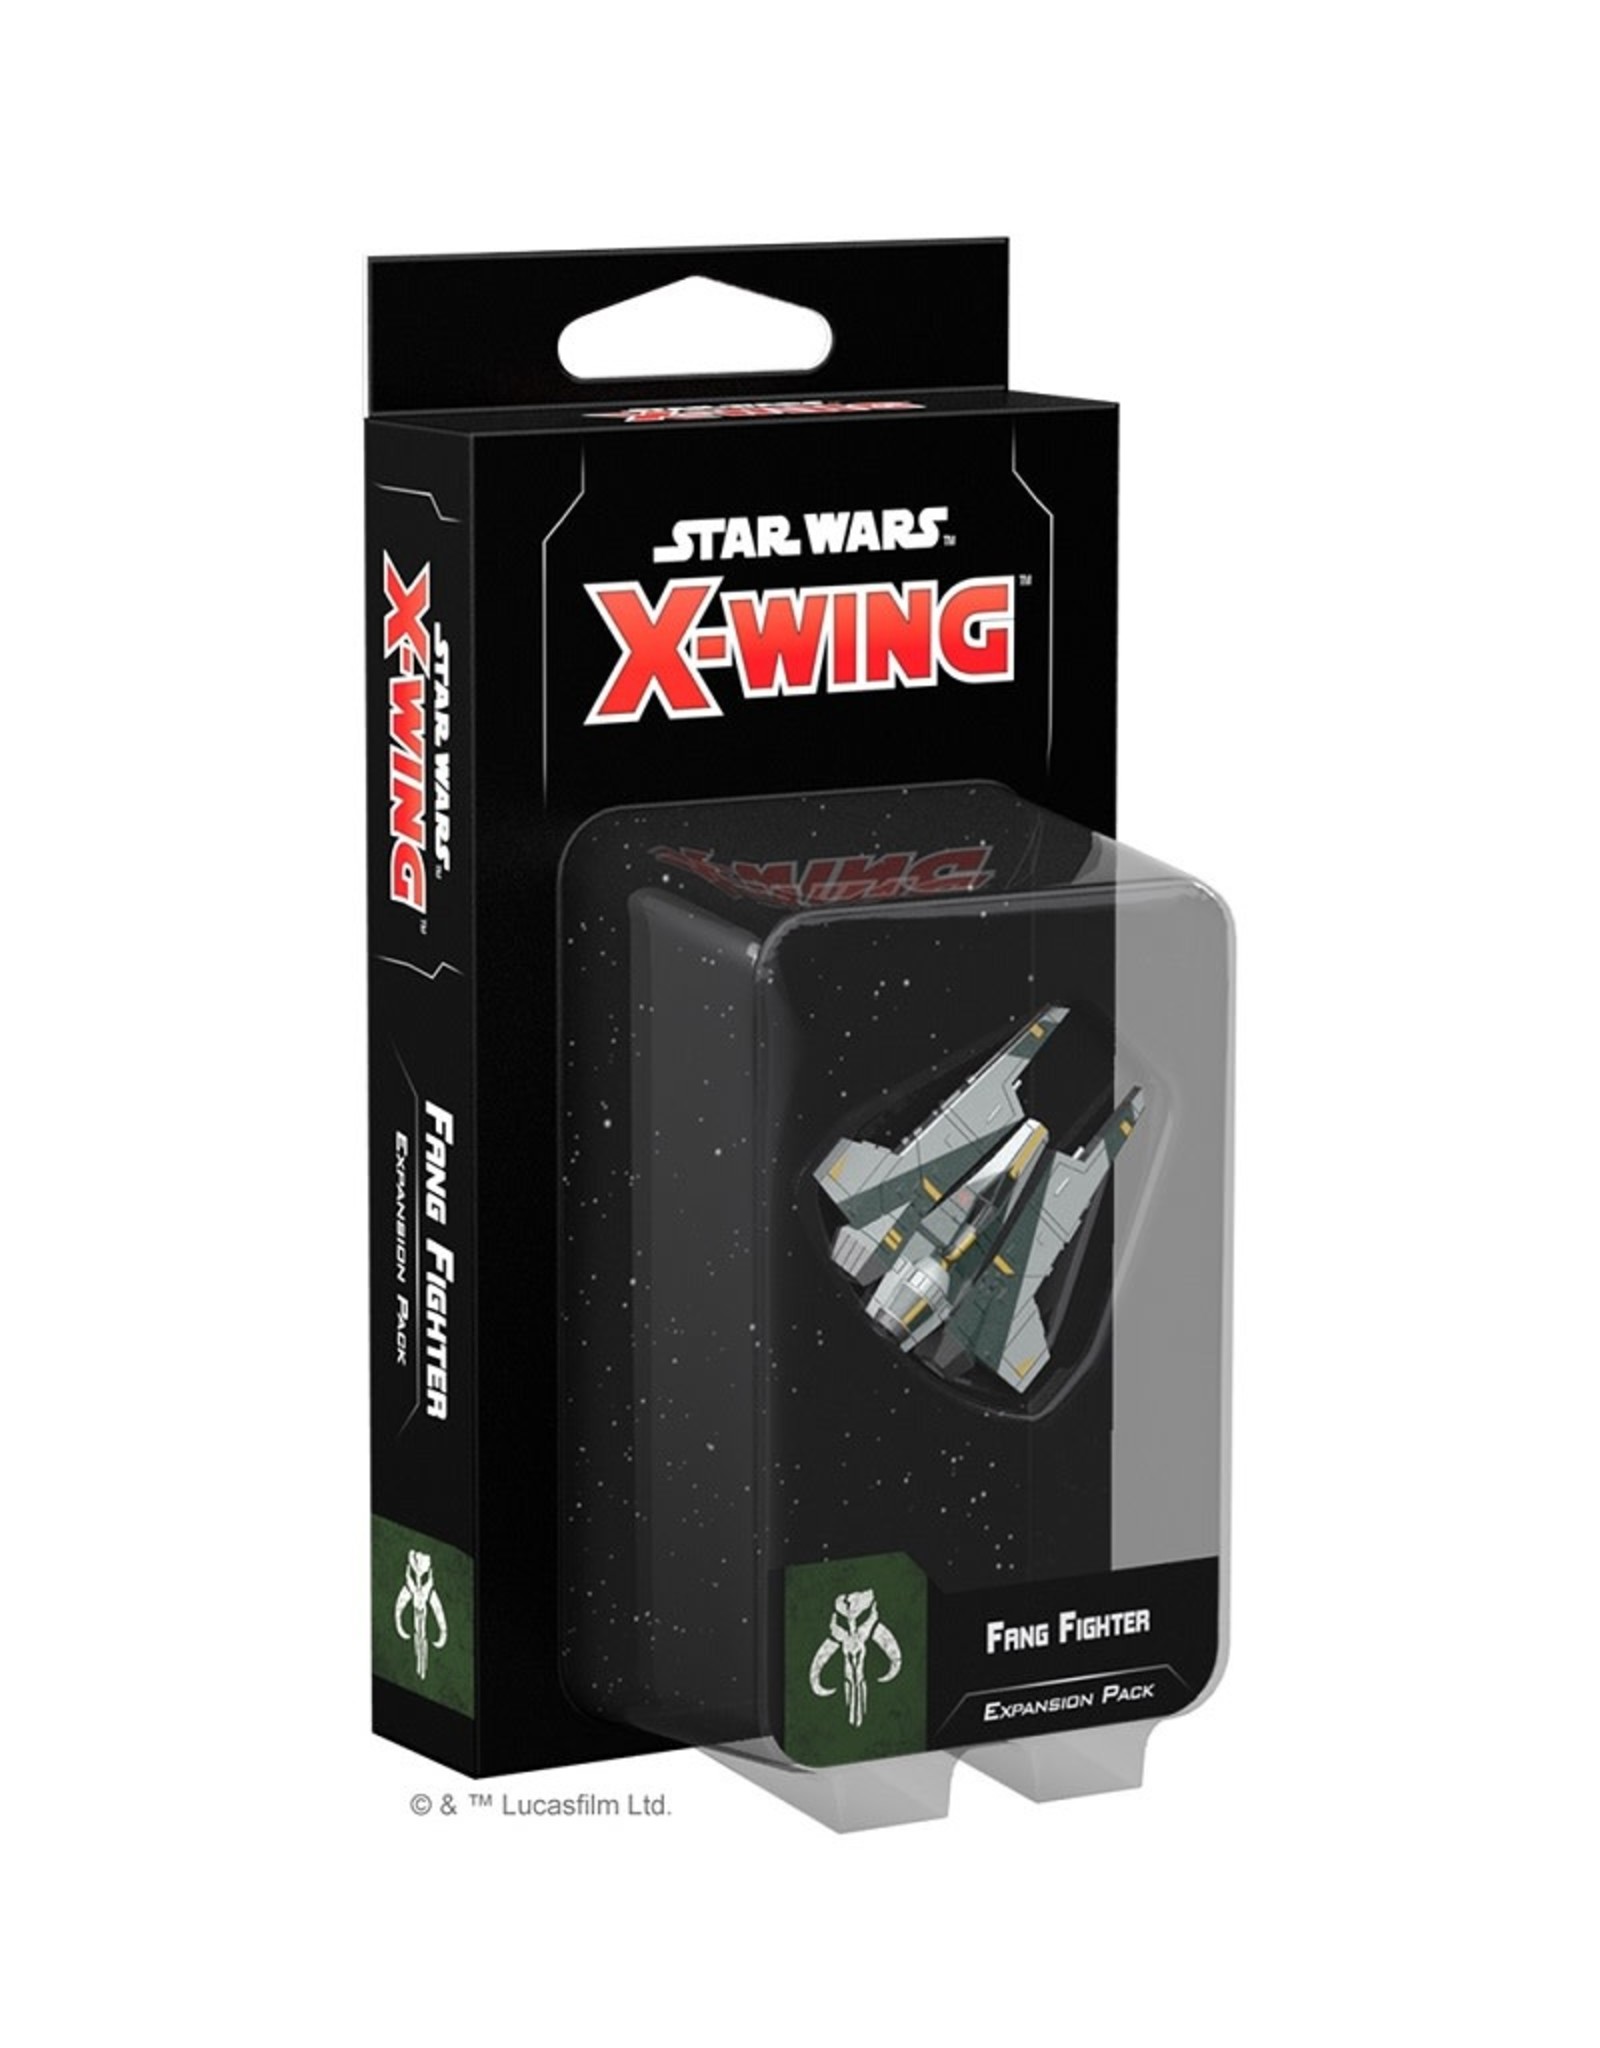 Atomic Mass Games Star Wars X-Wing - Fang Fighter (2nd Edition)